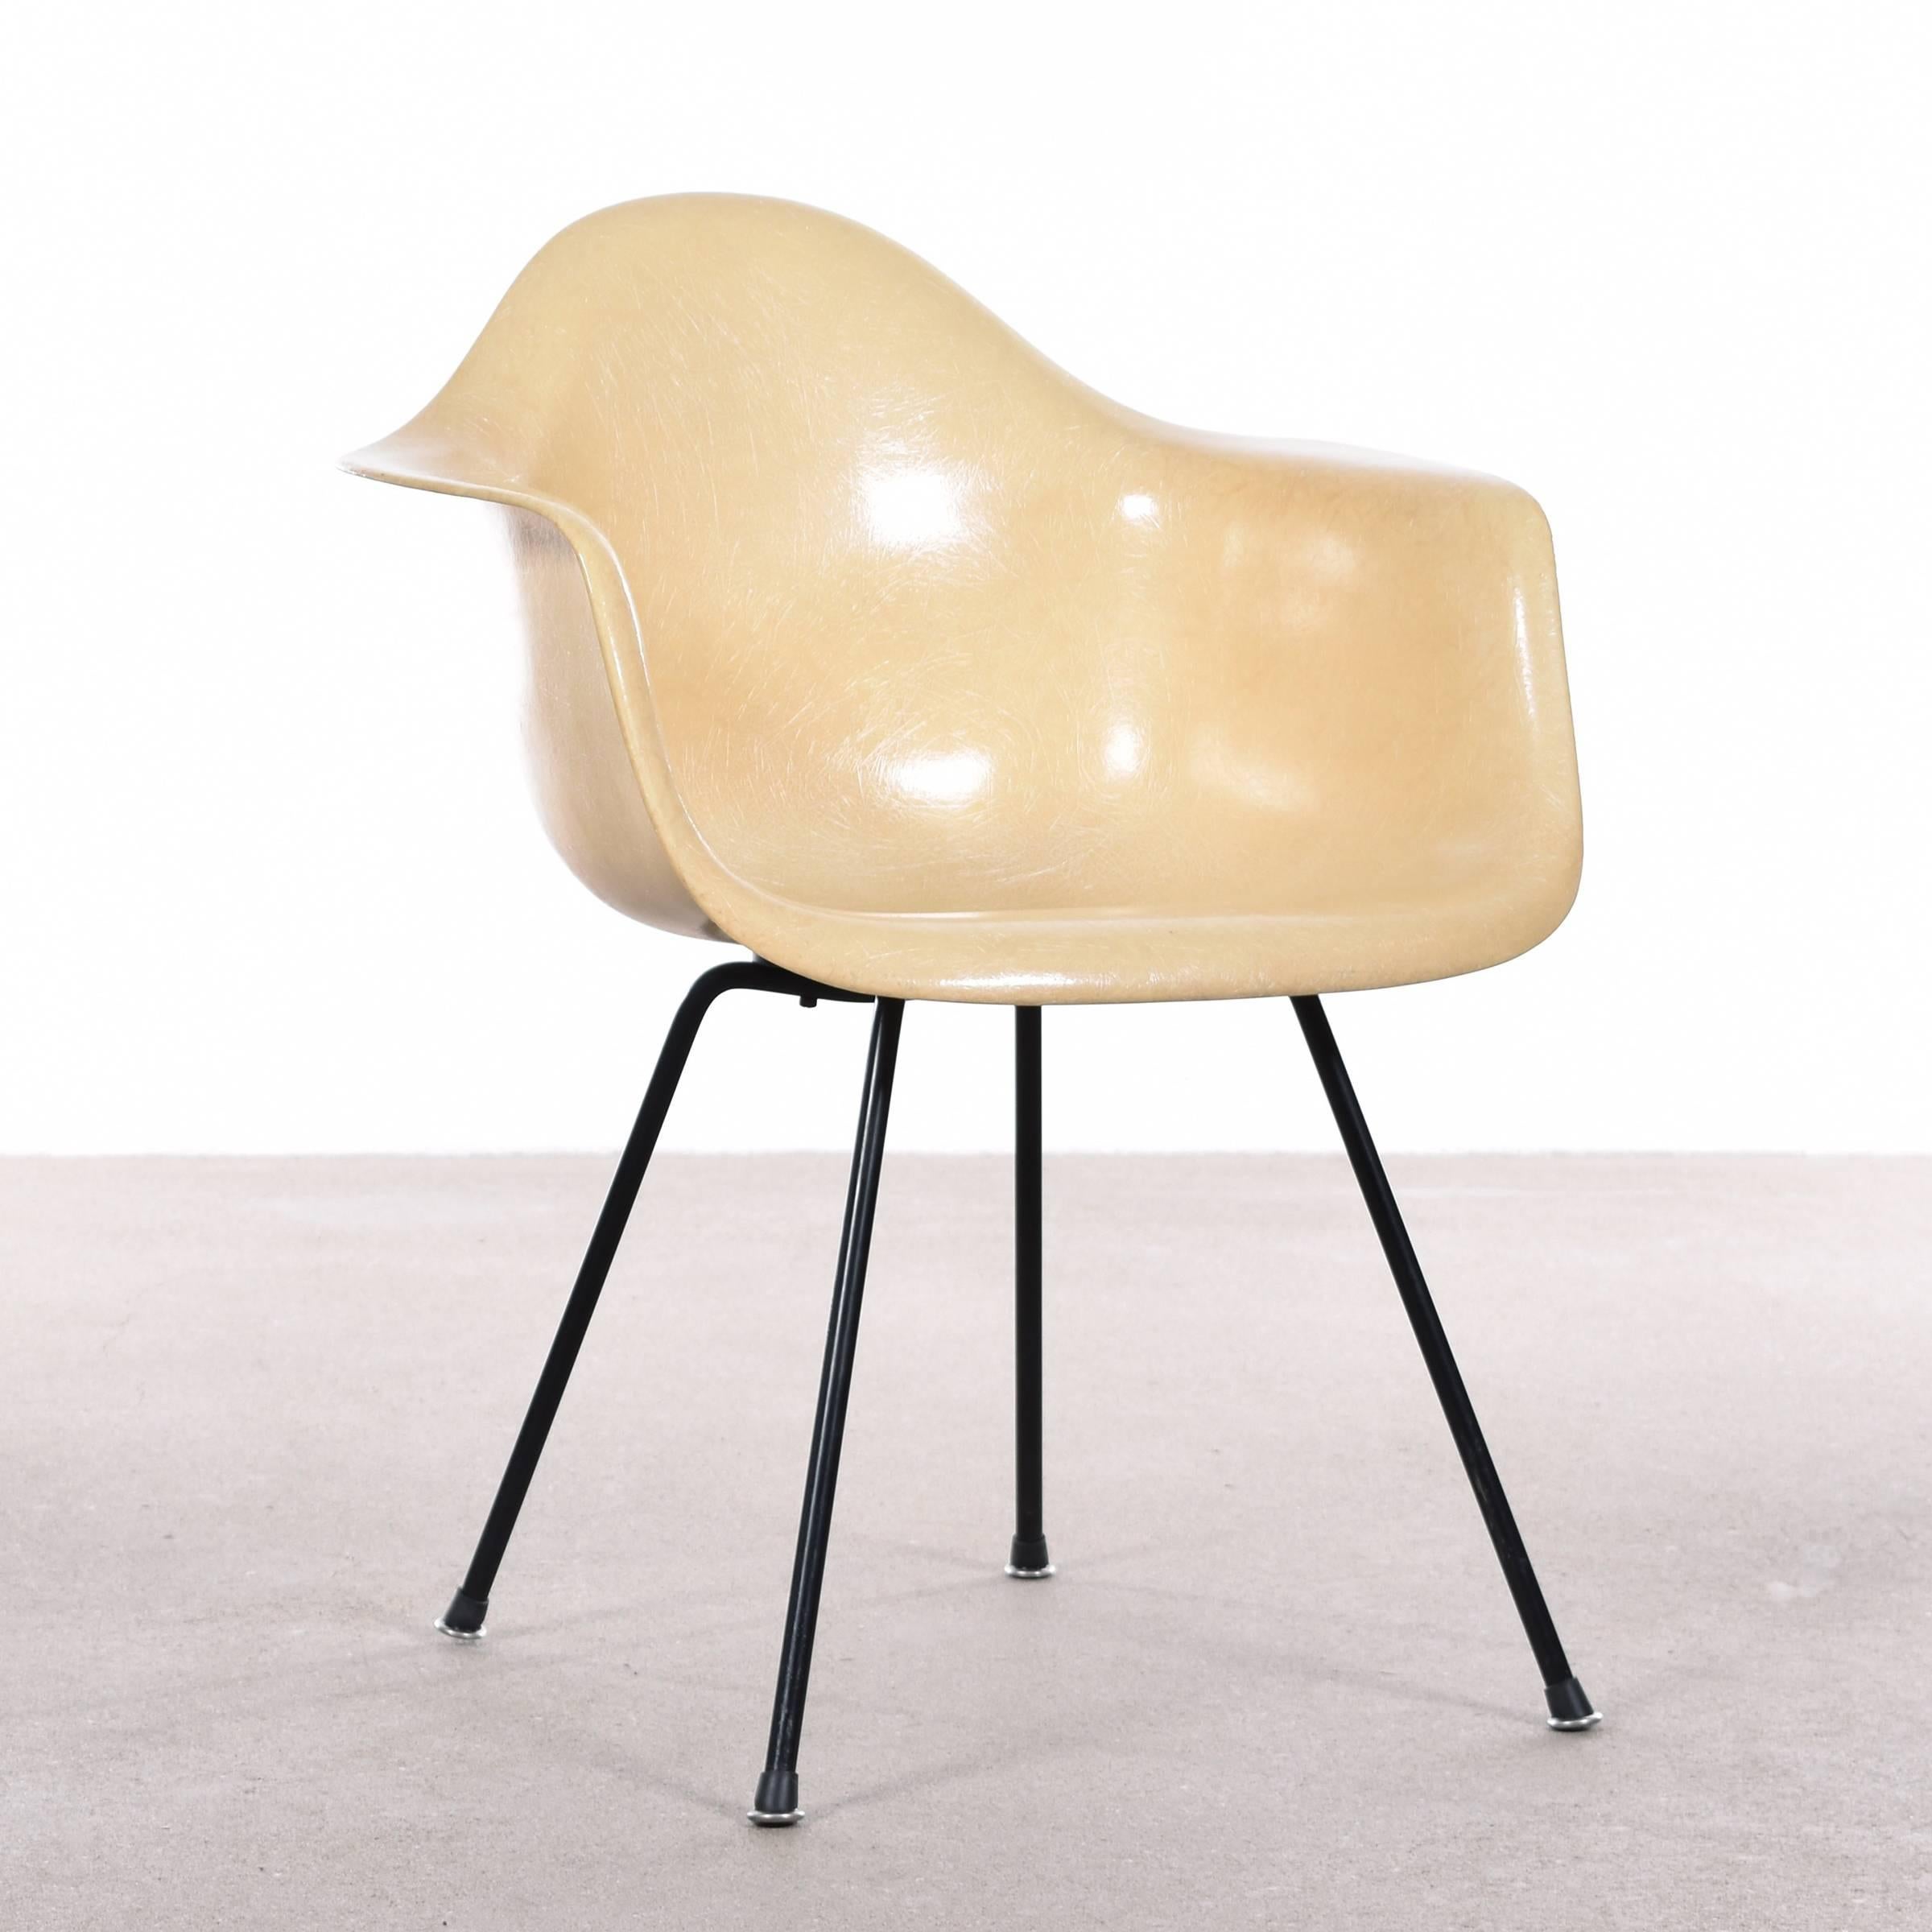 Iconic Dax chair in natural parchment color. Chair is in excellent vintage condition. Second generation Zenith production with large shock mounts but no rope. Transparent shell with large fibers.

Free shipping for European destinations!

We